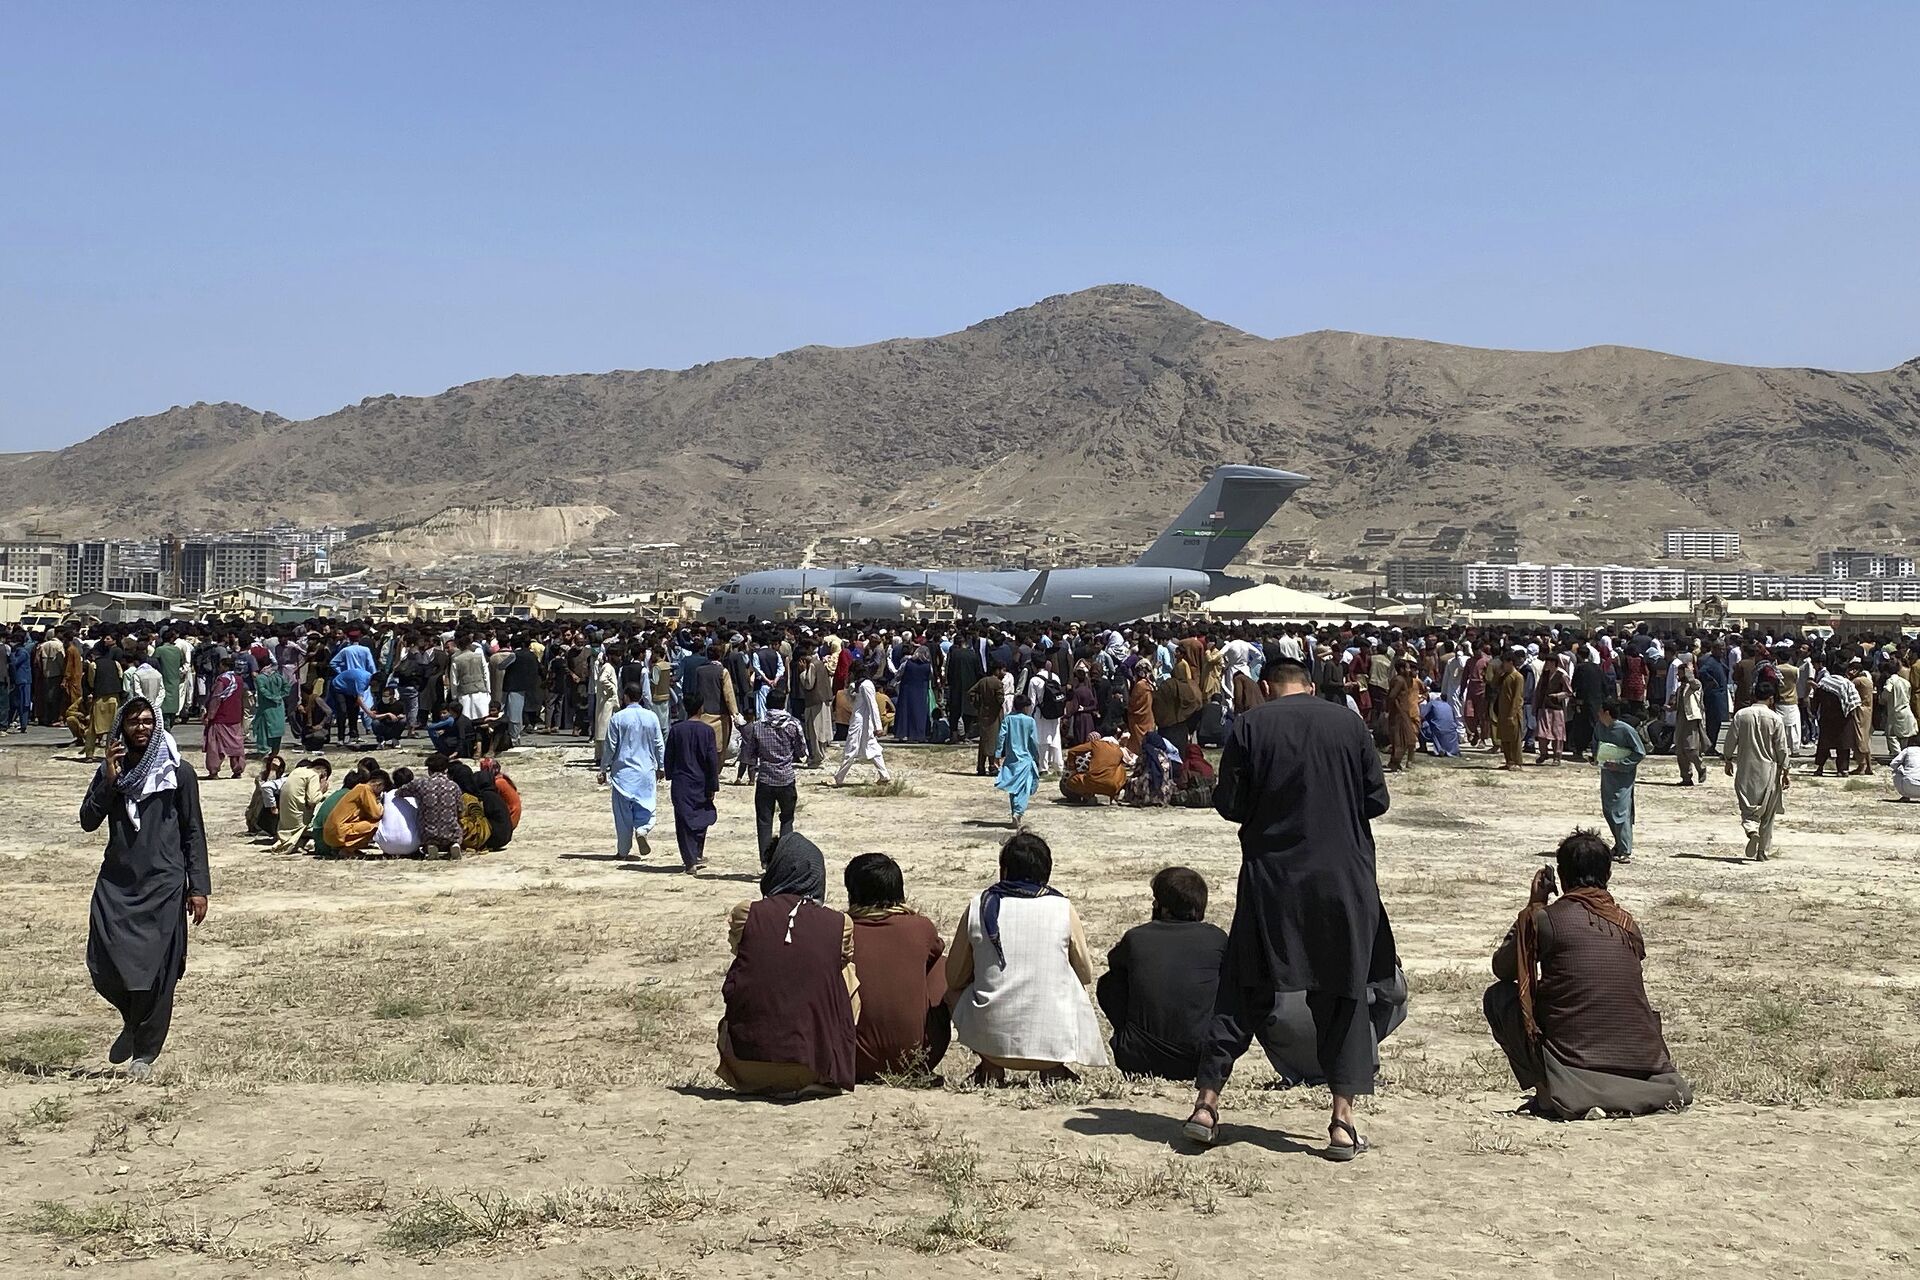 Hundreds of people gather near a U.S. Air Force C-17 transport plane at a perimeter at the international airport in Kabul, Afghanistan, Monday, Aug. 16, 2021. On Monday, the U.S. military and officials focus was on Kabul’s airport, where thousands of Afghans trapped by the sudden Taliban takeover rushed the tarmac and clung to U.S. military planes deployed to fly out staffers of the U.S. Embassy, which shut down Sunday, and others - Sputnik International, 1920, 07.09.2021